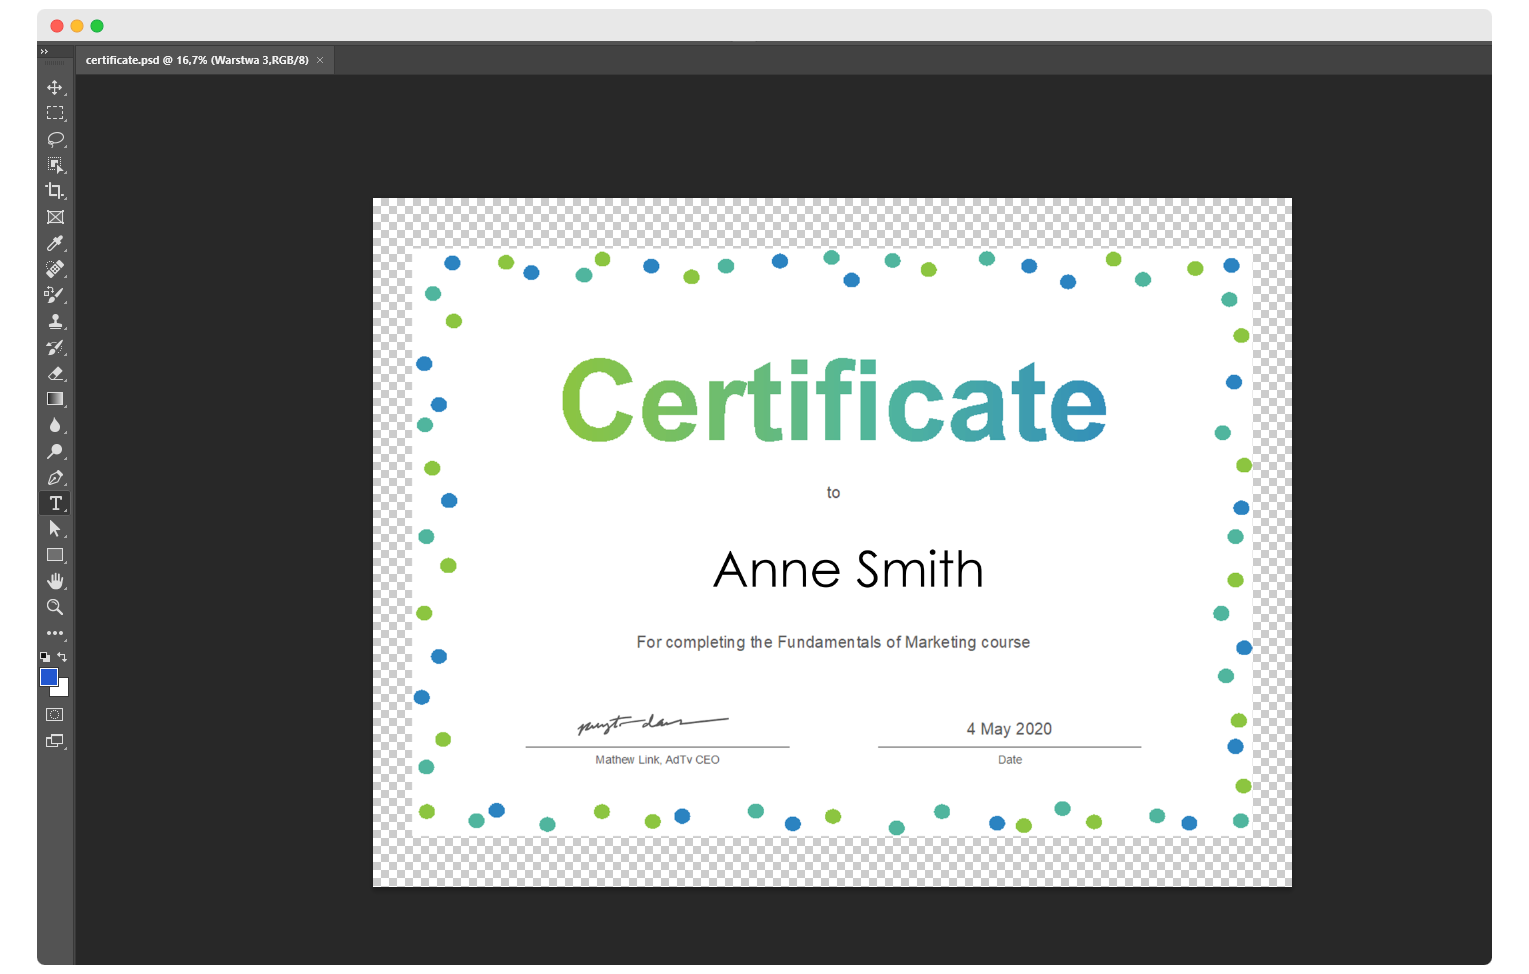 Generating multiple certificates with different names via Photoshop.